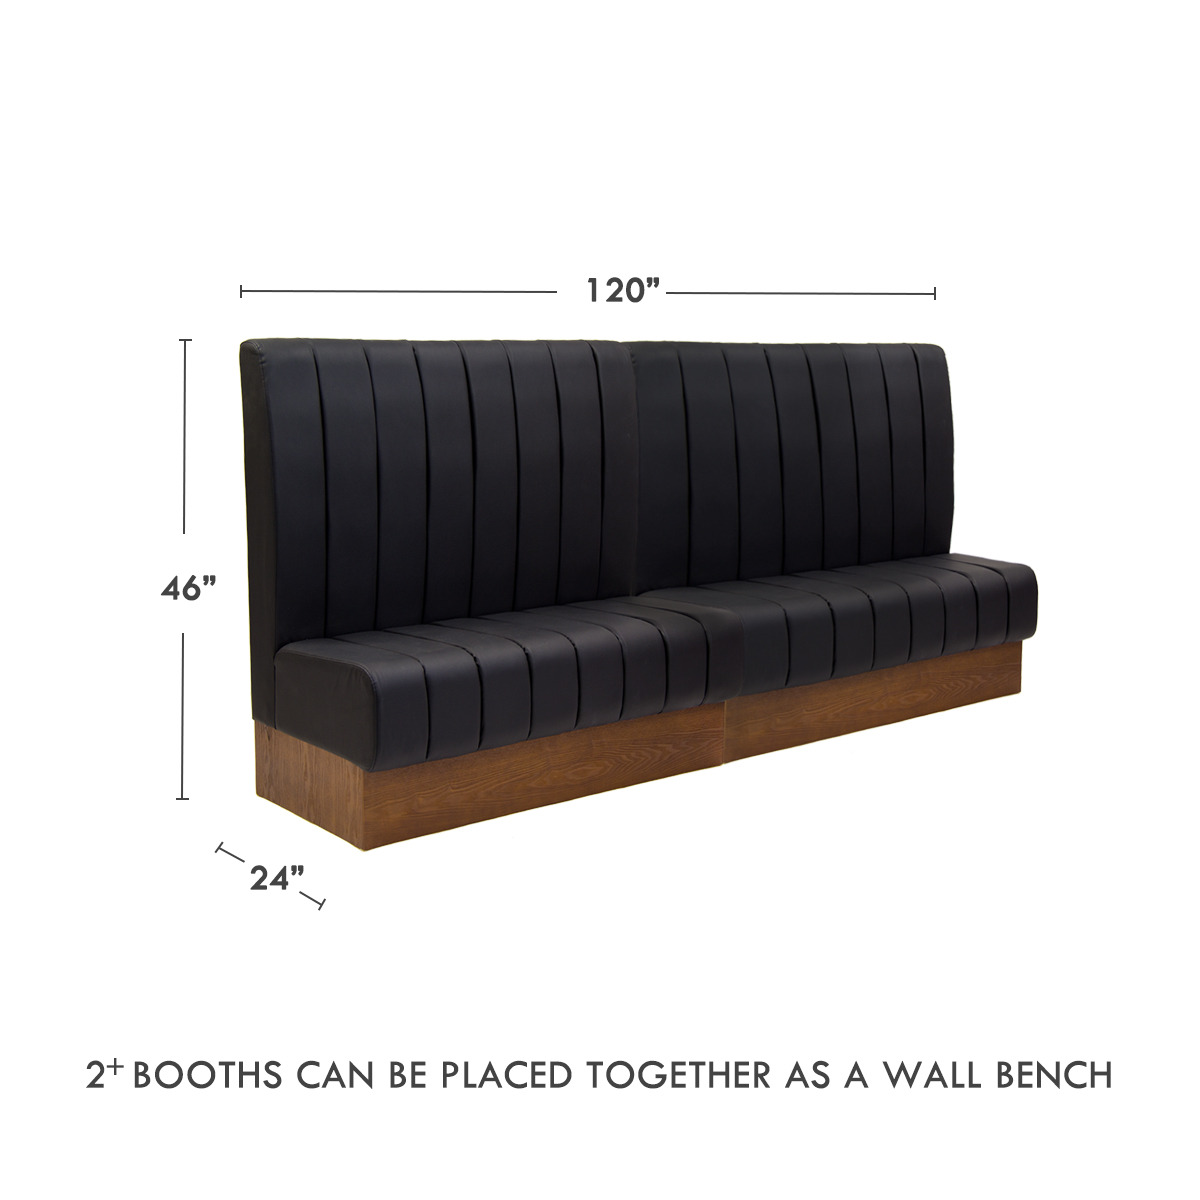 60L, Veneer Booth with Upholstered Back & Seat in Black : Restaurant ...